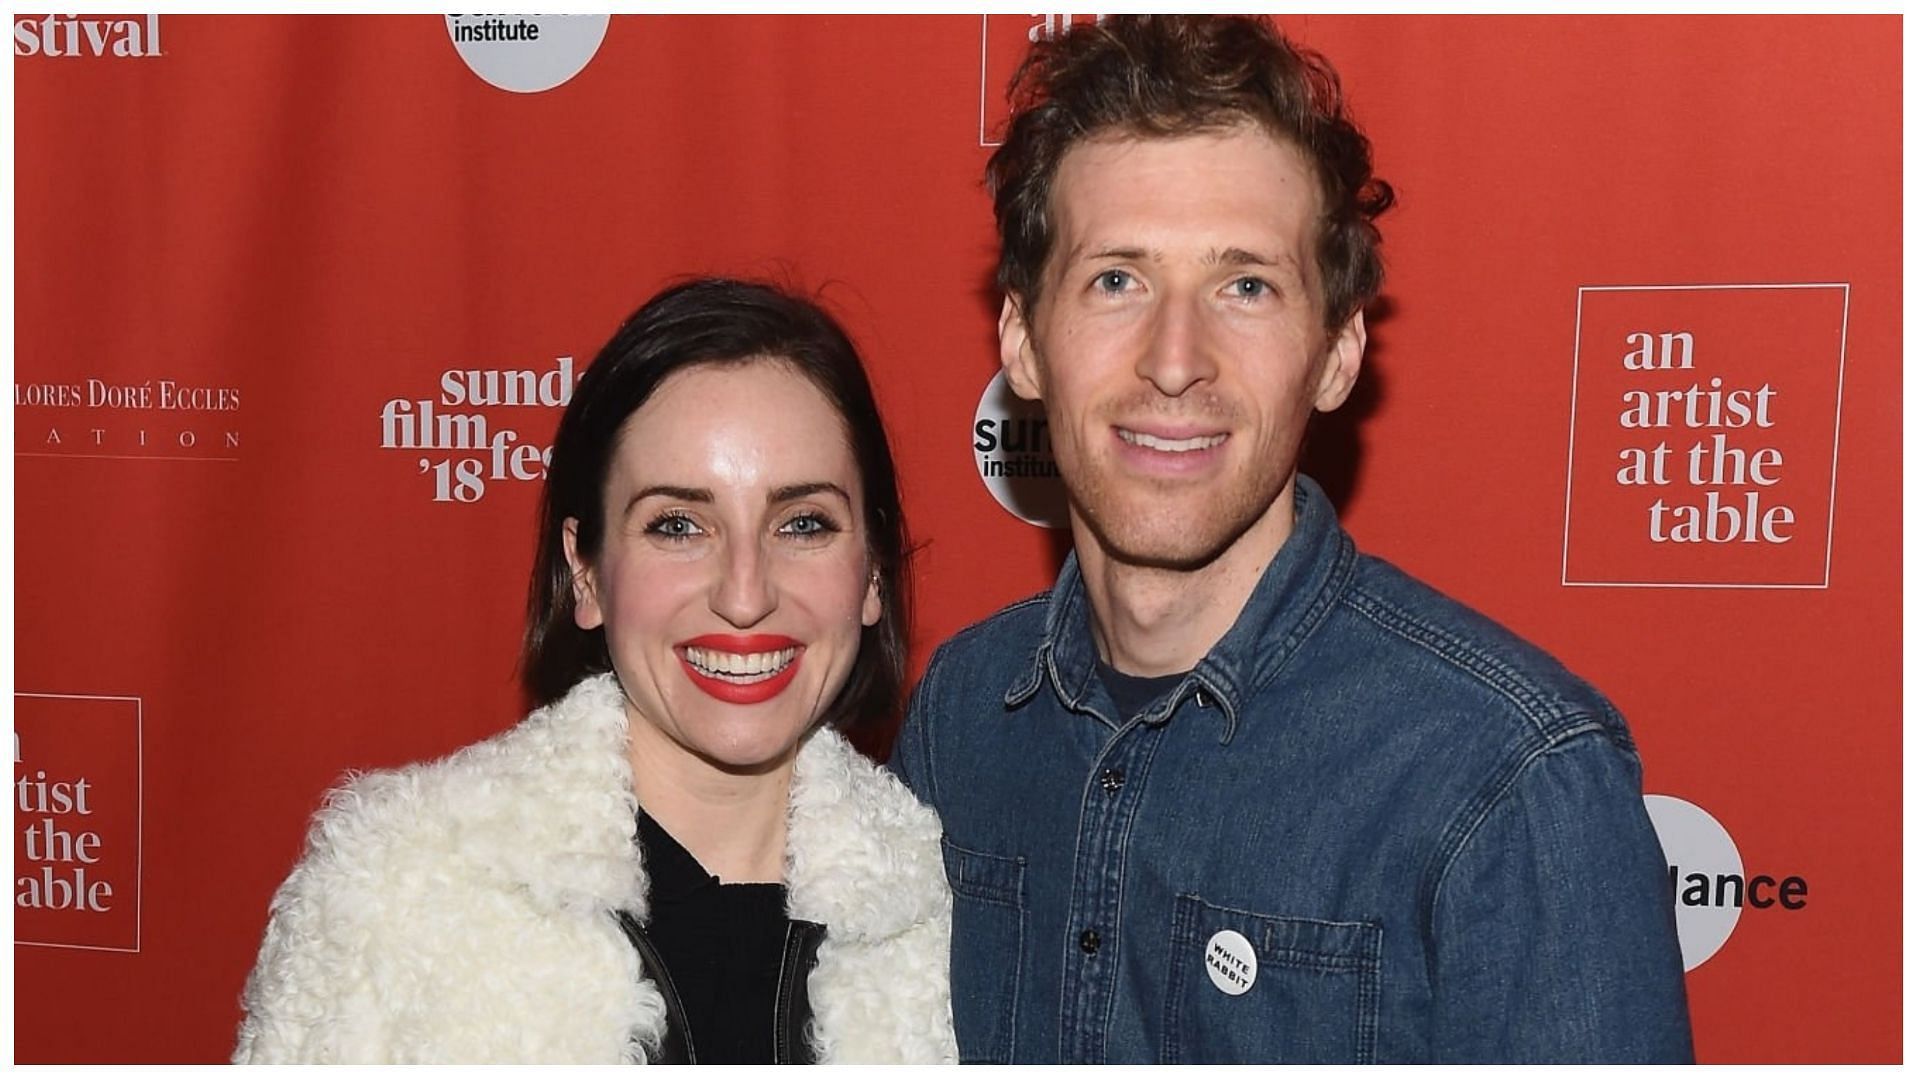 Zoe Lister-Jones and Daryl Wein got married in 2013 (Image via Nicholas Hunt/Getty Images)